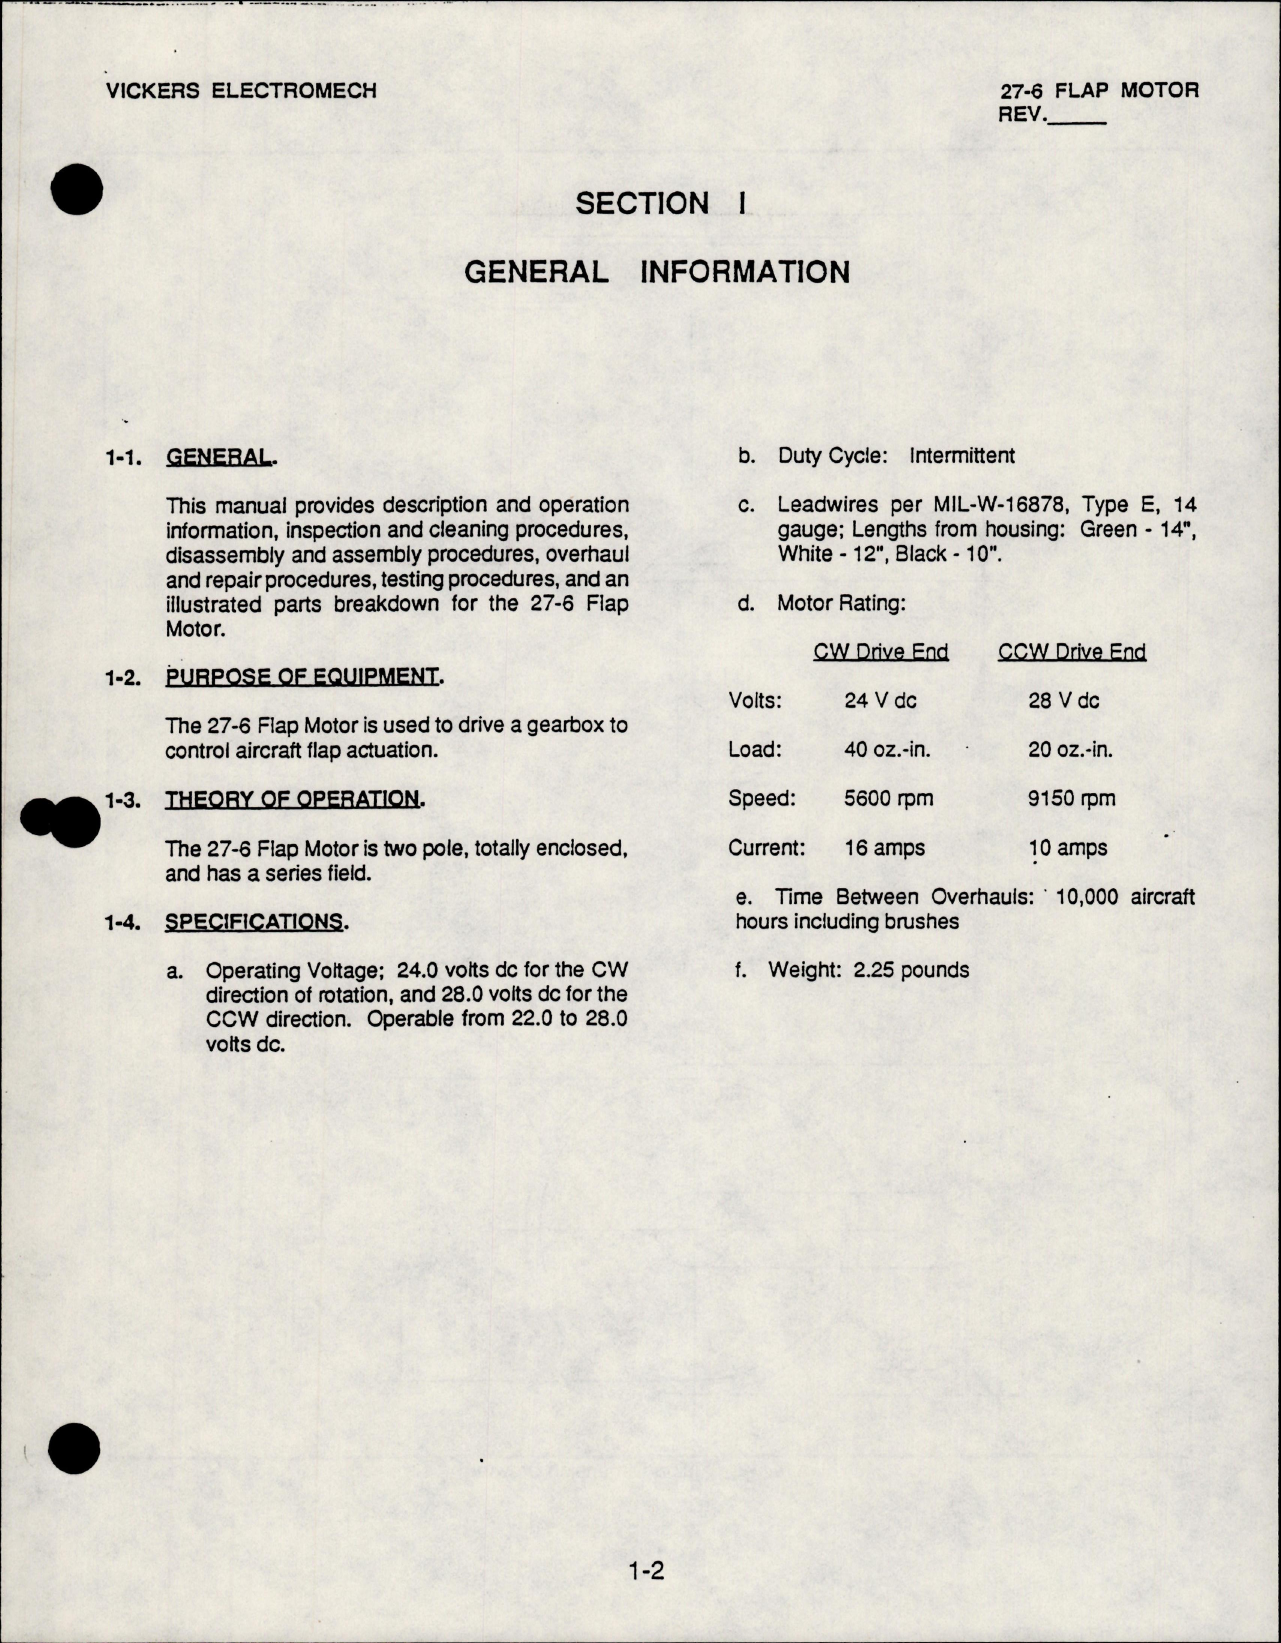 Sample page 7 from AirCorps Library document: Overhaul with Parts Breakdown for 27-6 Flap Motor Assembly 